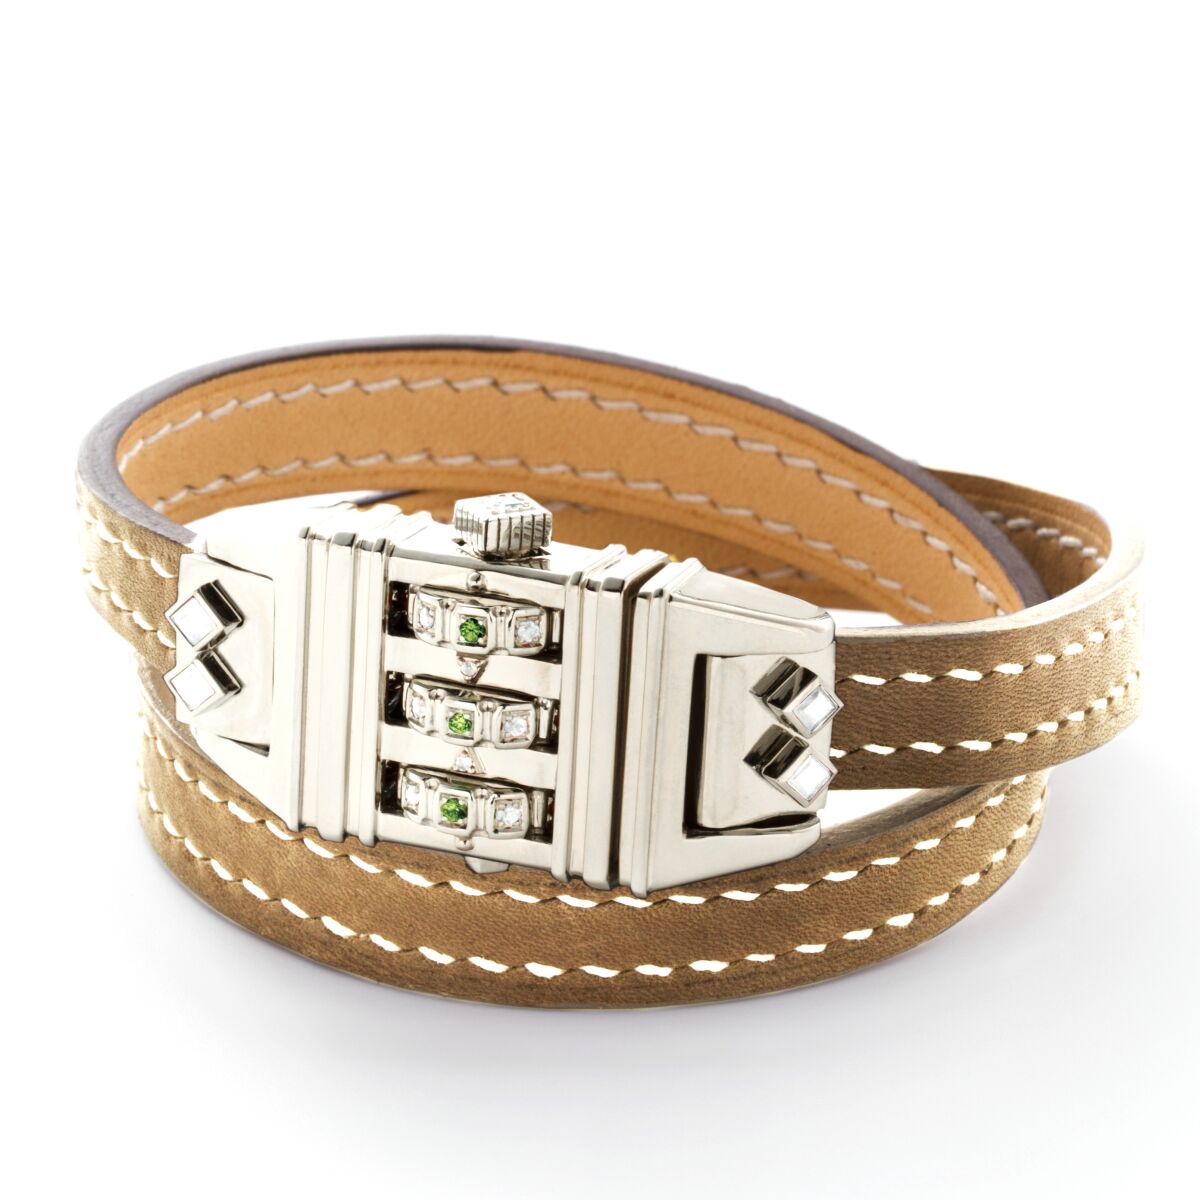  James Bank Design's Code leather and stainless steel combination lock bracelet.